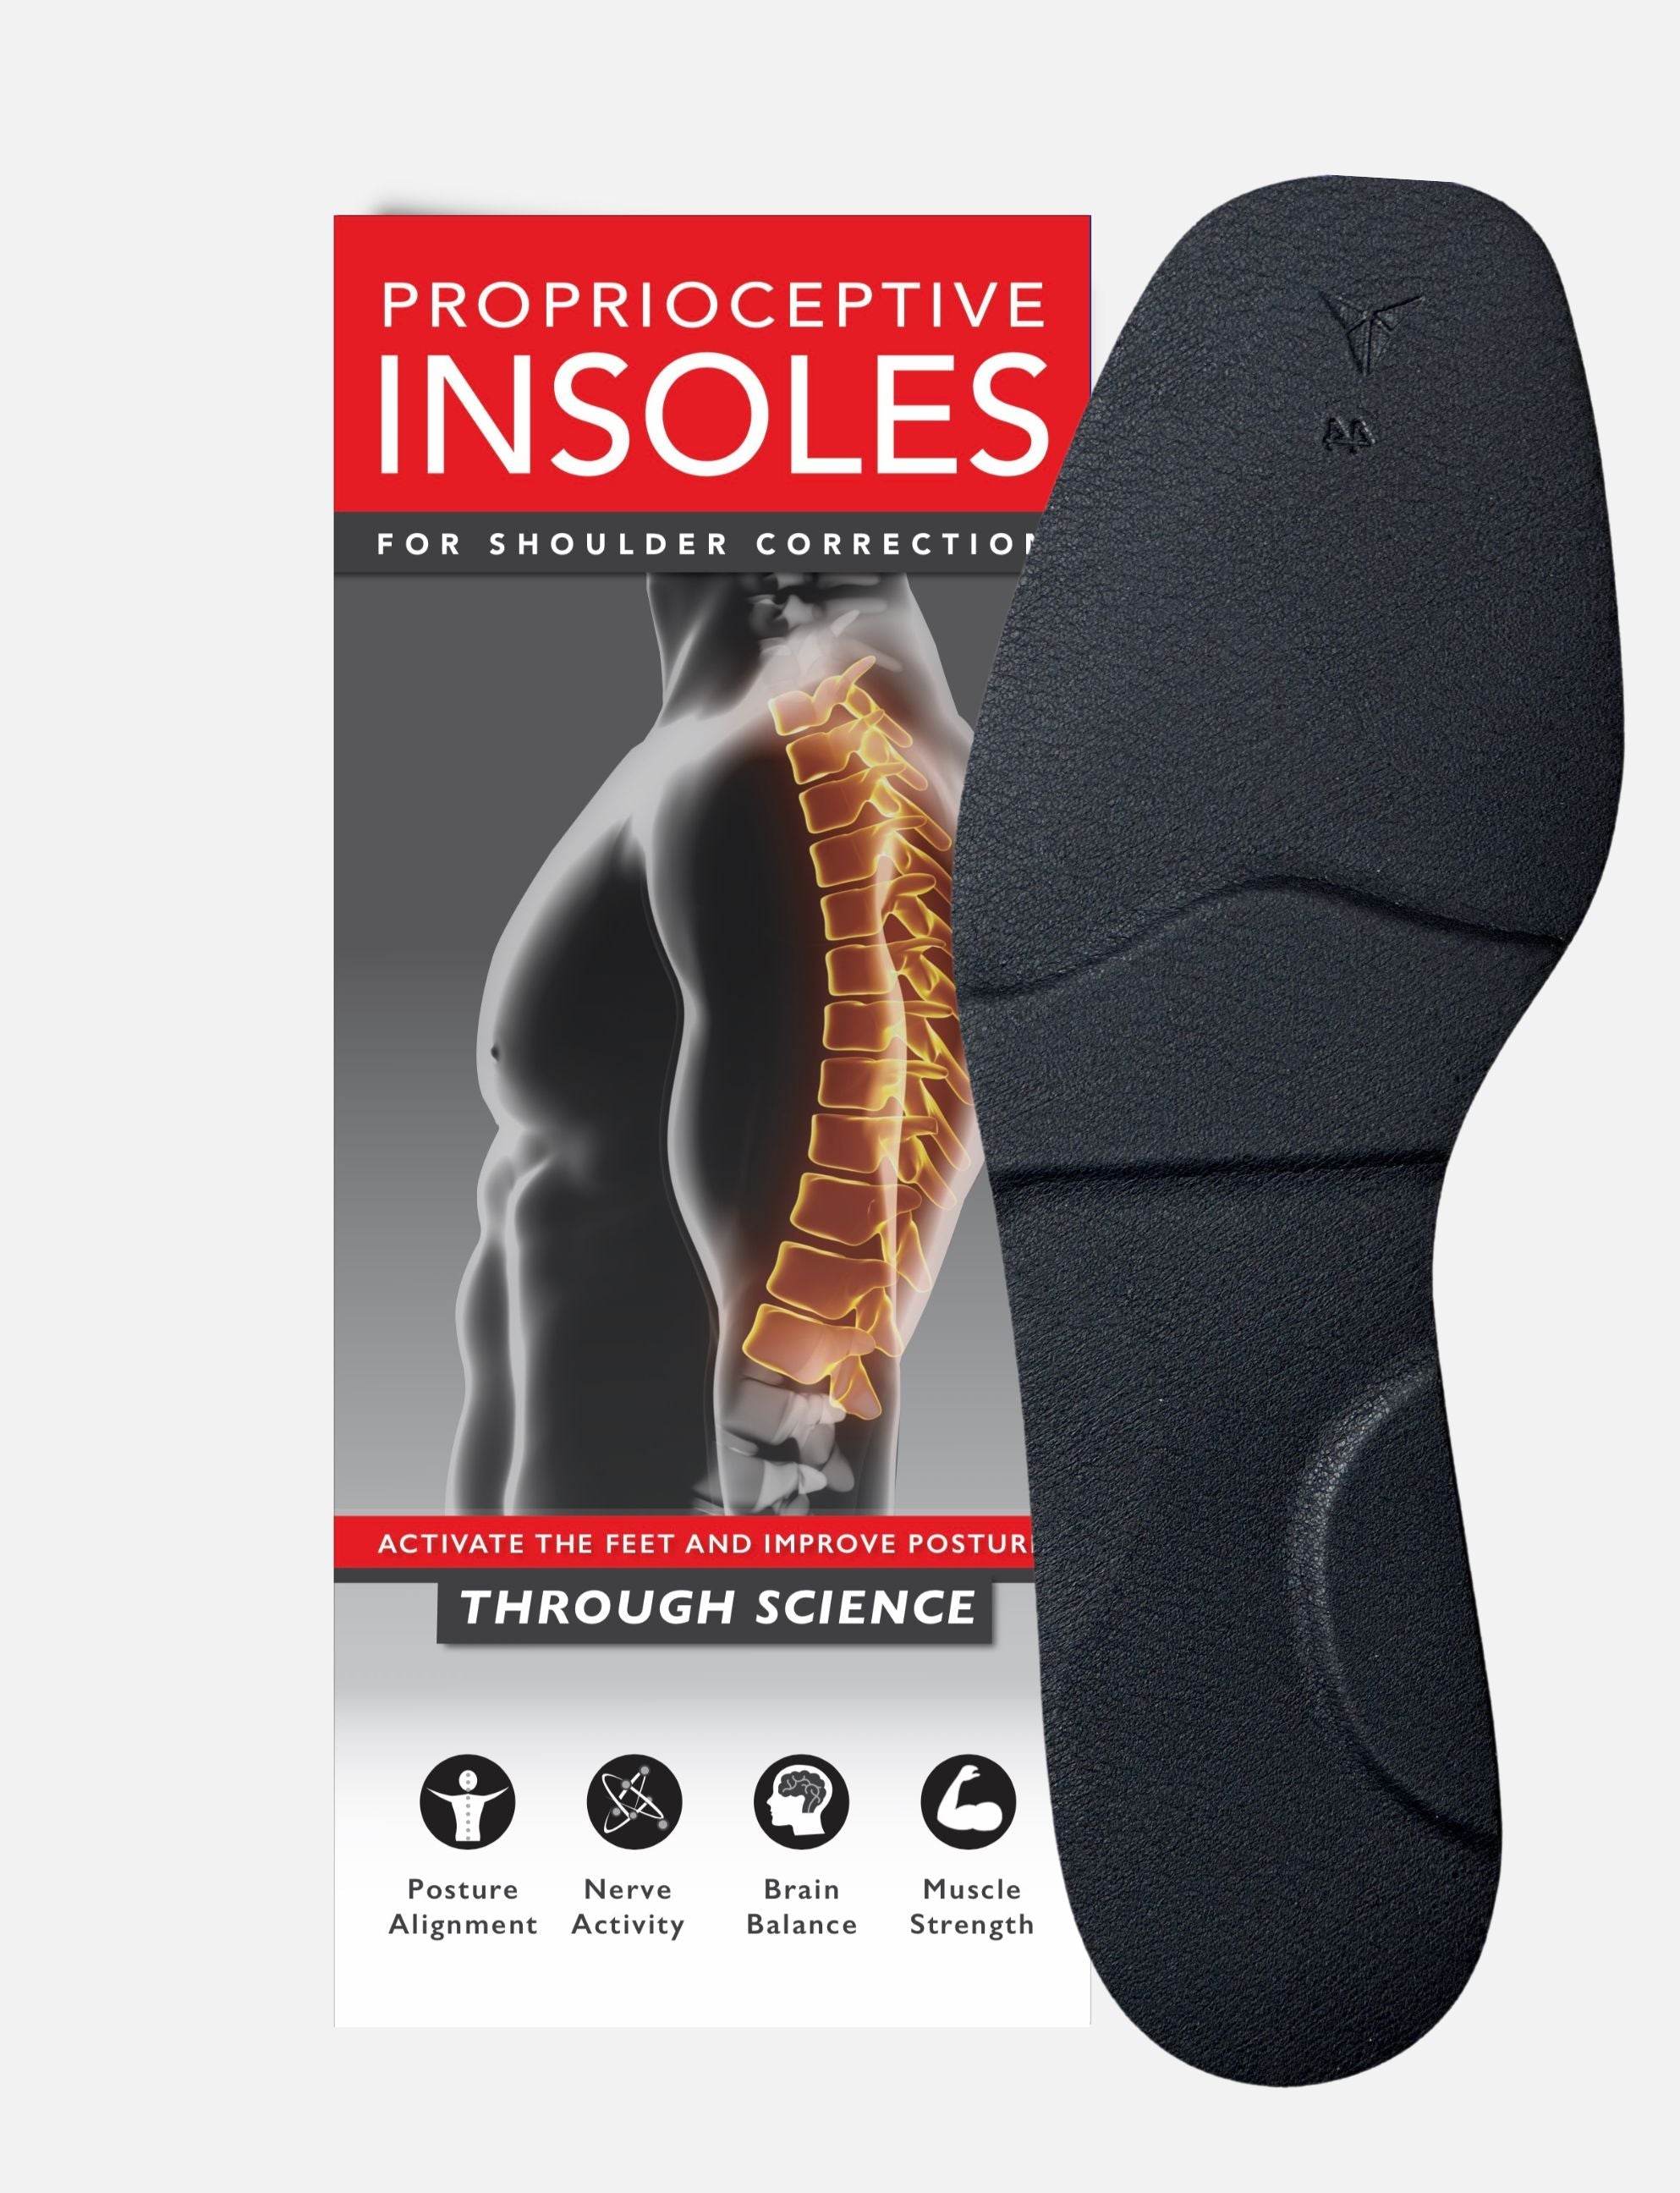 The Performance Insole Scientifically Proven to Make You More